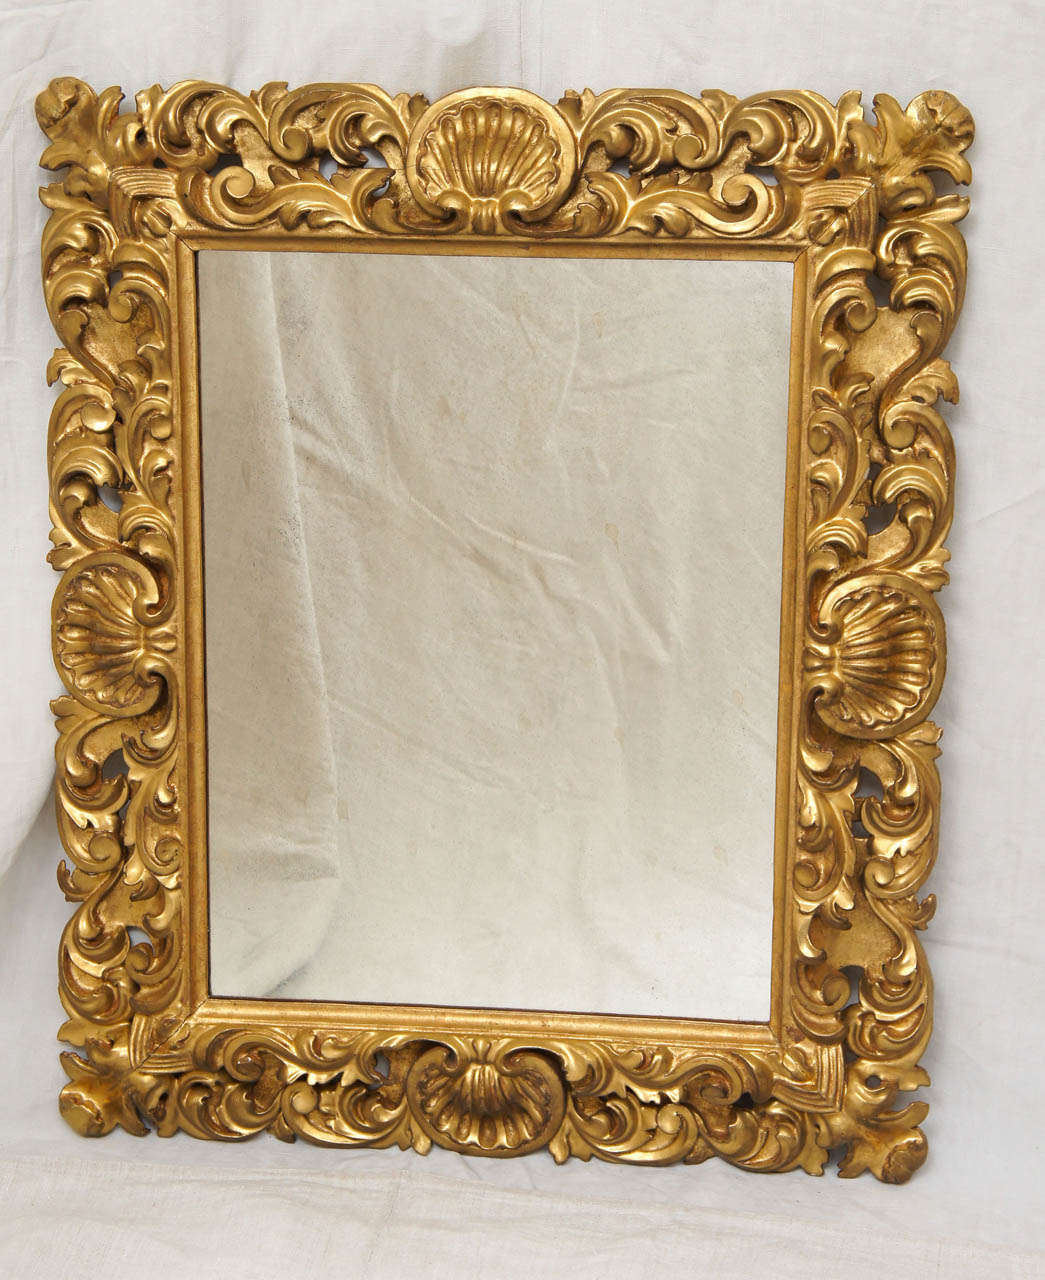 Intricately carved Italian frame with original gilt.